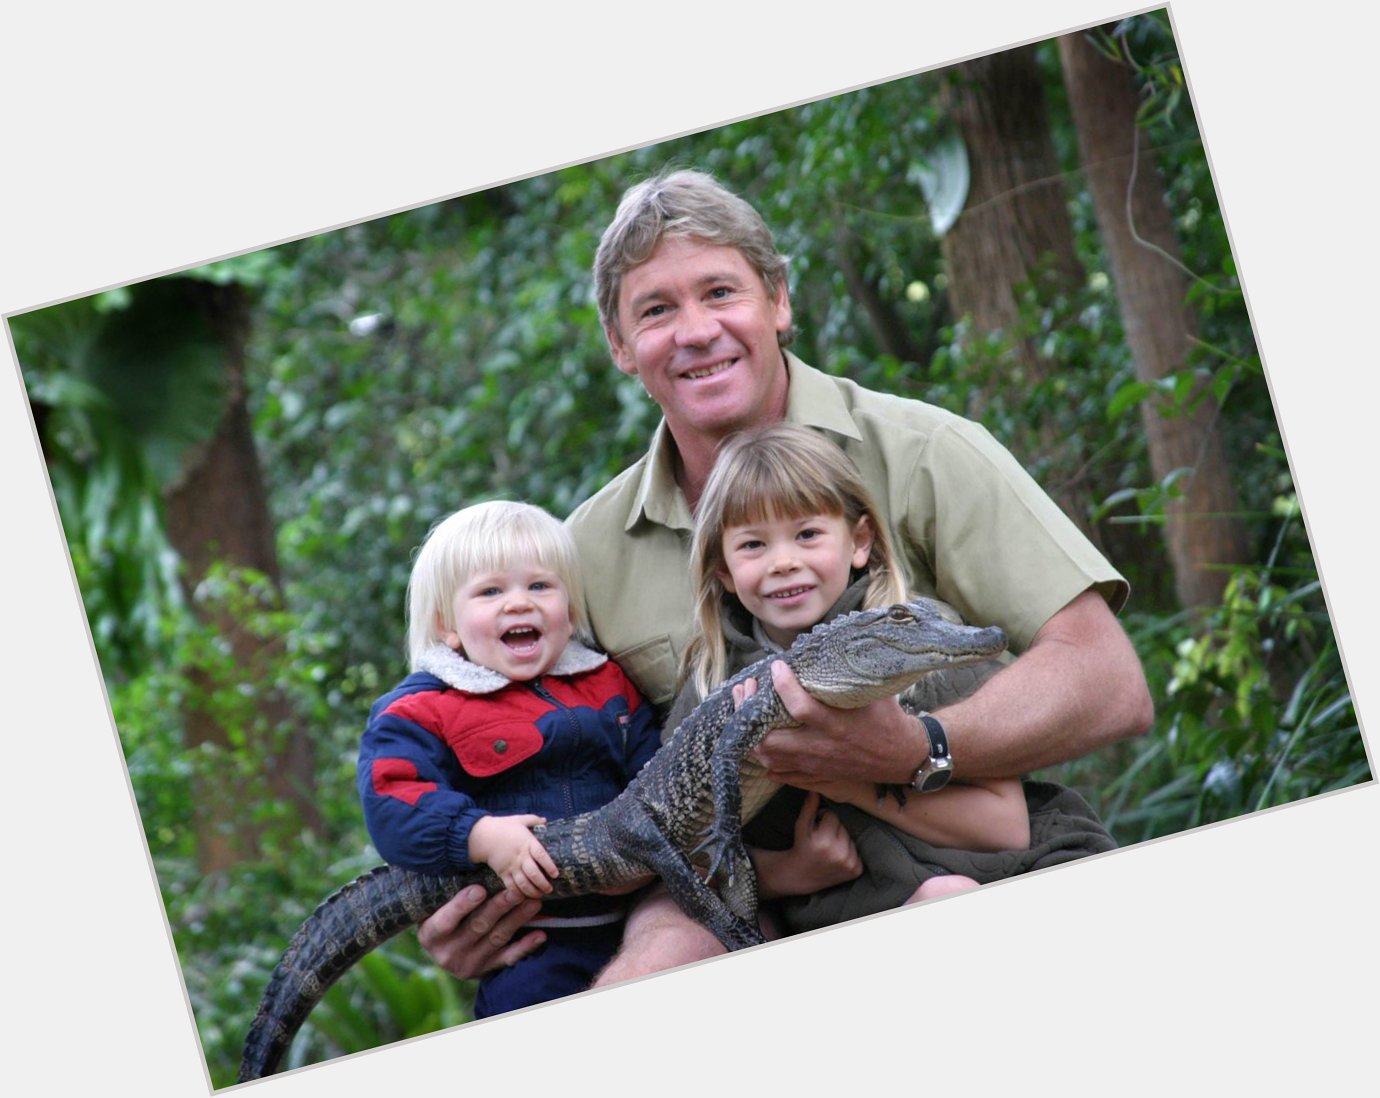 Steve Irwin would have been 57 years old today. Happy Birthday. 